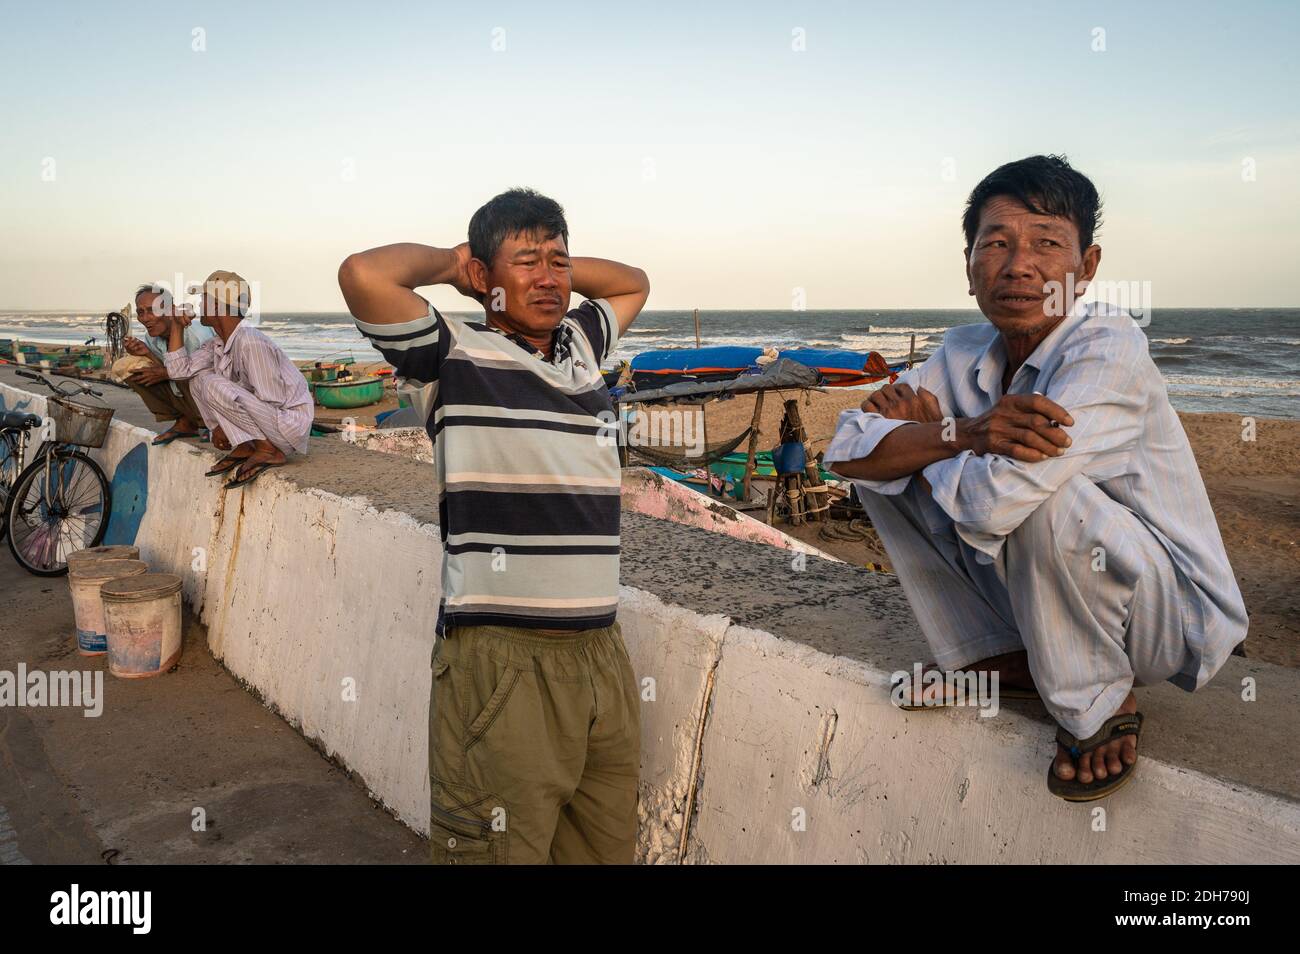 Men chatting and hanging out on the seawall, Phuoc Hai, Vietnam Stock Photo